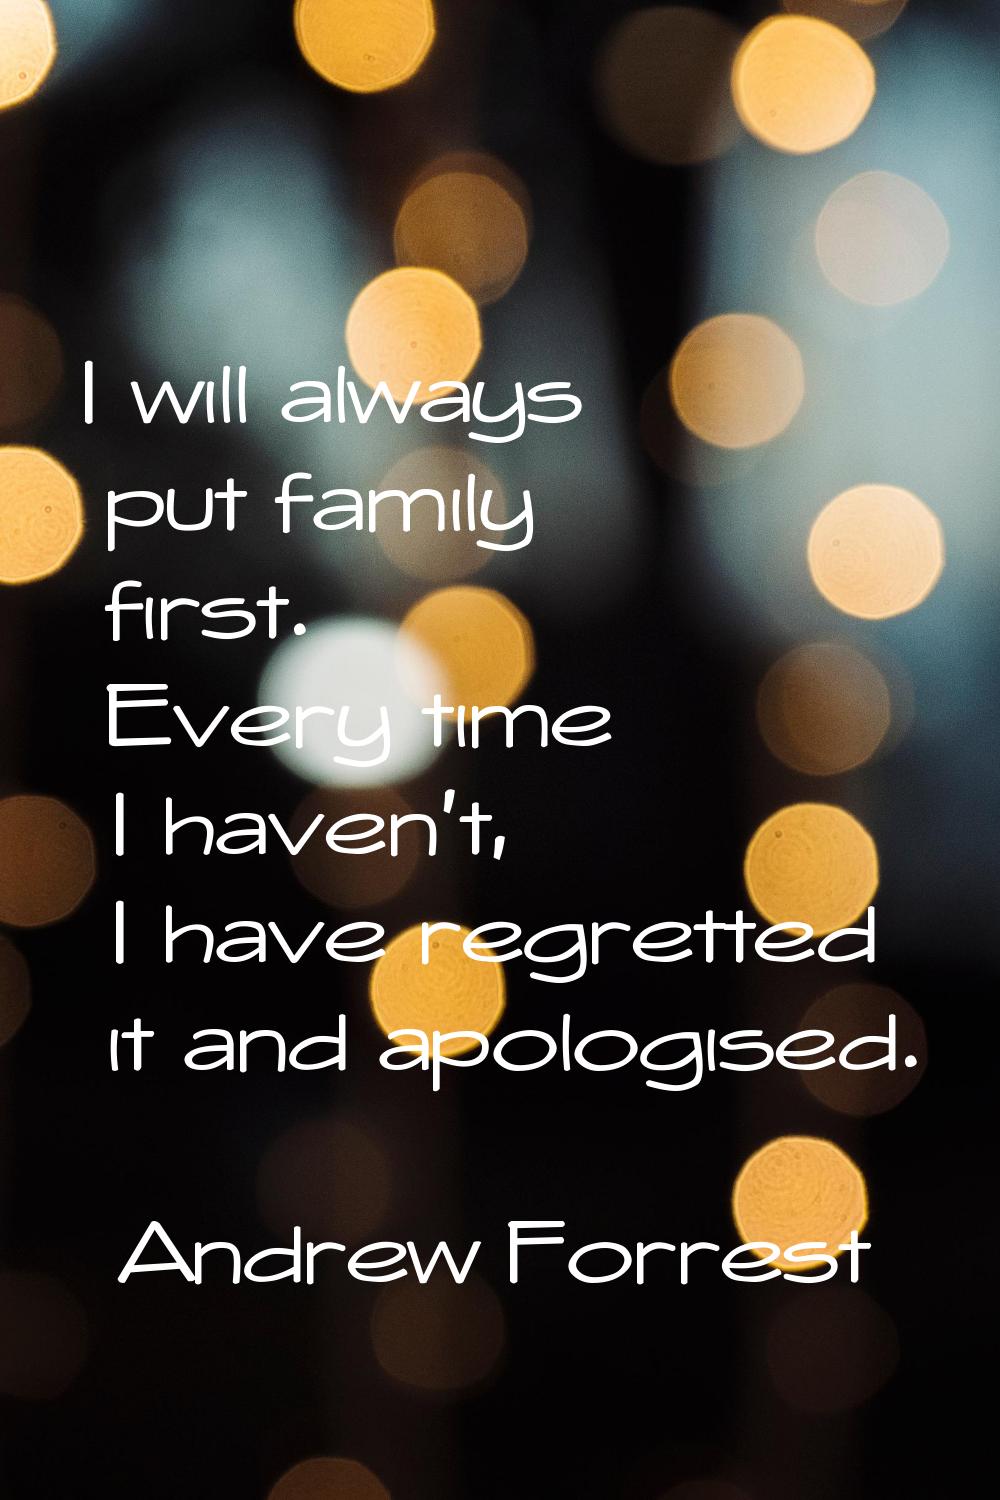 I will always put family first. Every time I haven't, I have regretted it and apologised.